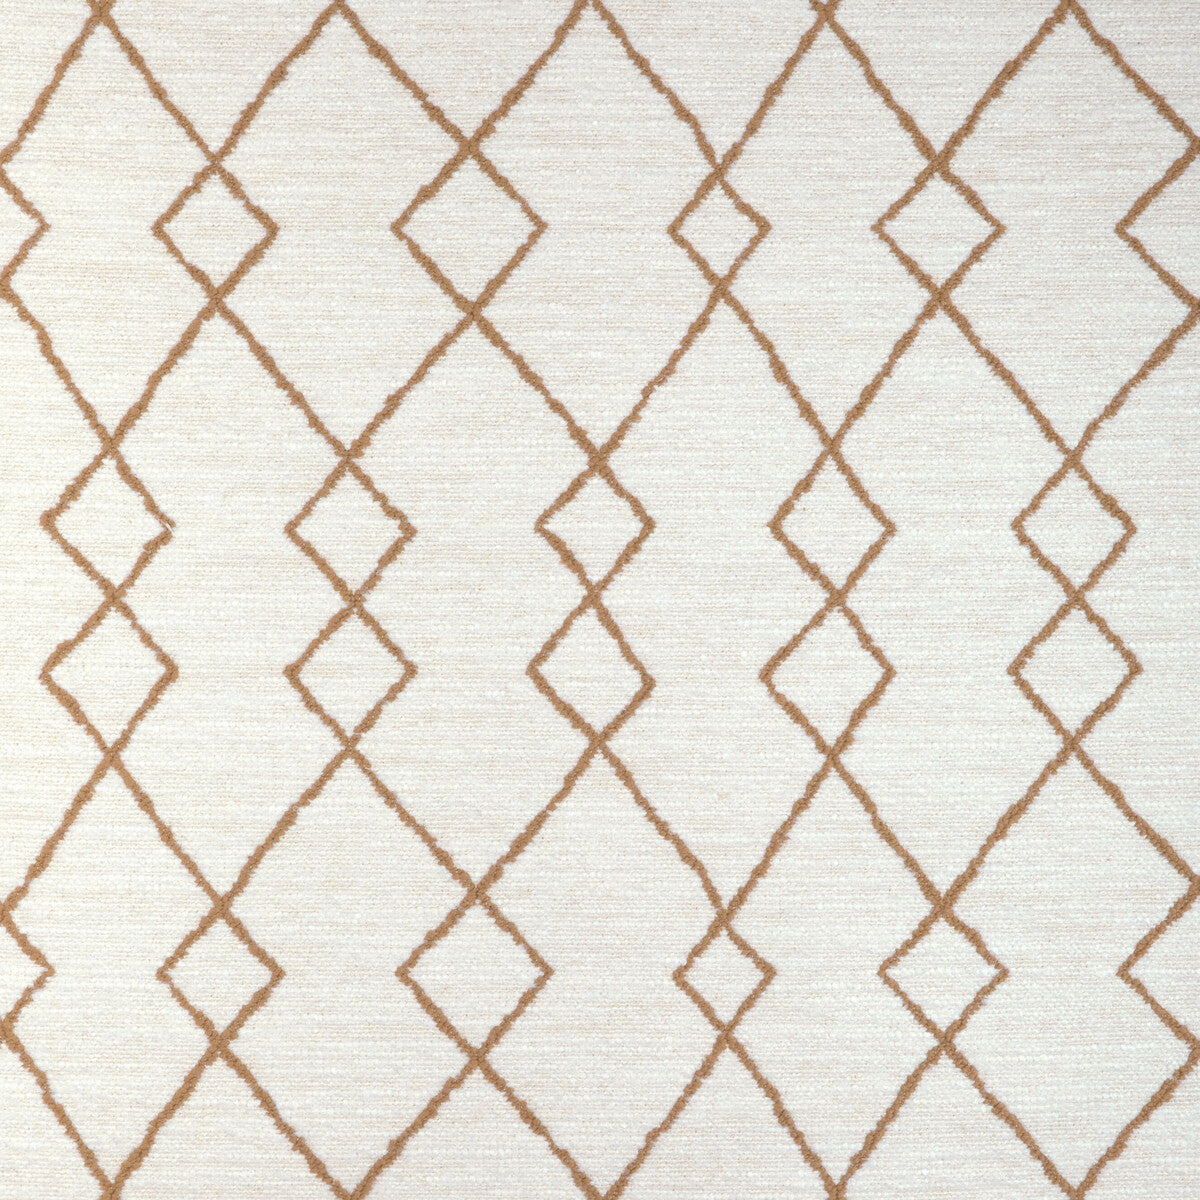 Geo Graphica fabric in camel color - pattern 36904.16.0 - by Kravet Couture in the Atelier Weaves collection